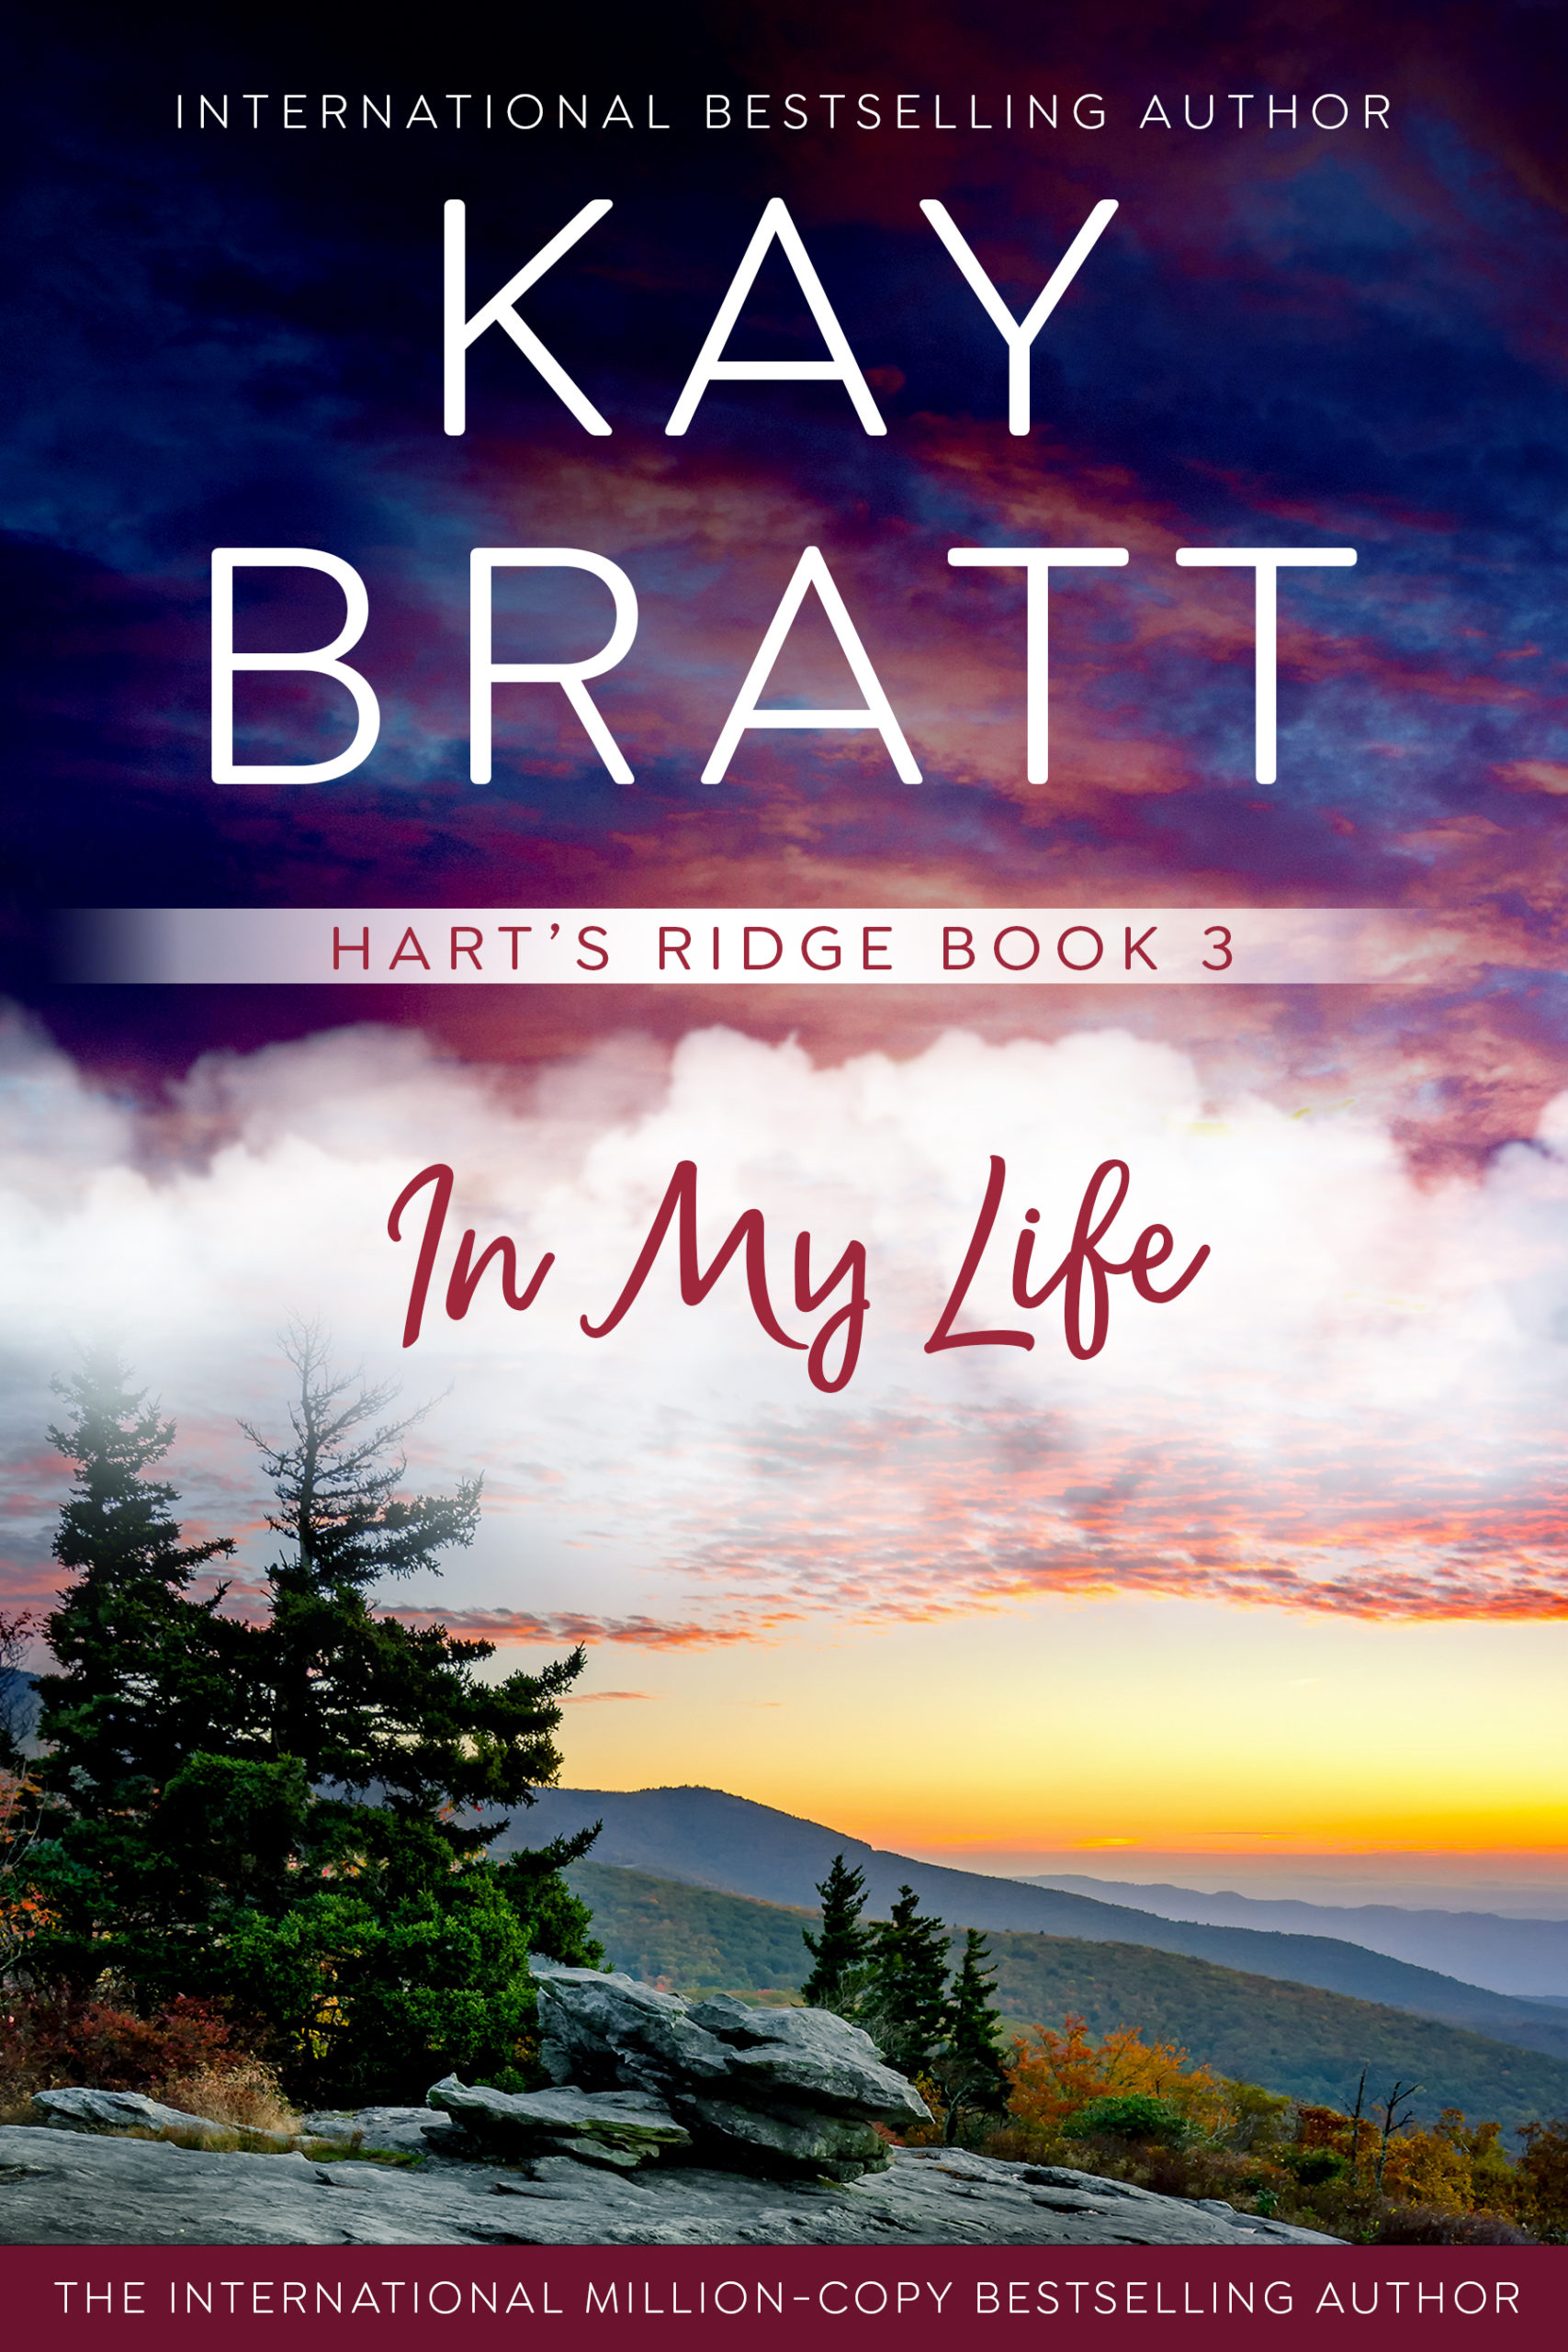 Book3_InMyLife_New_Banner